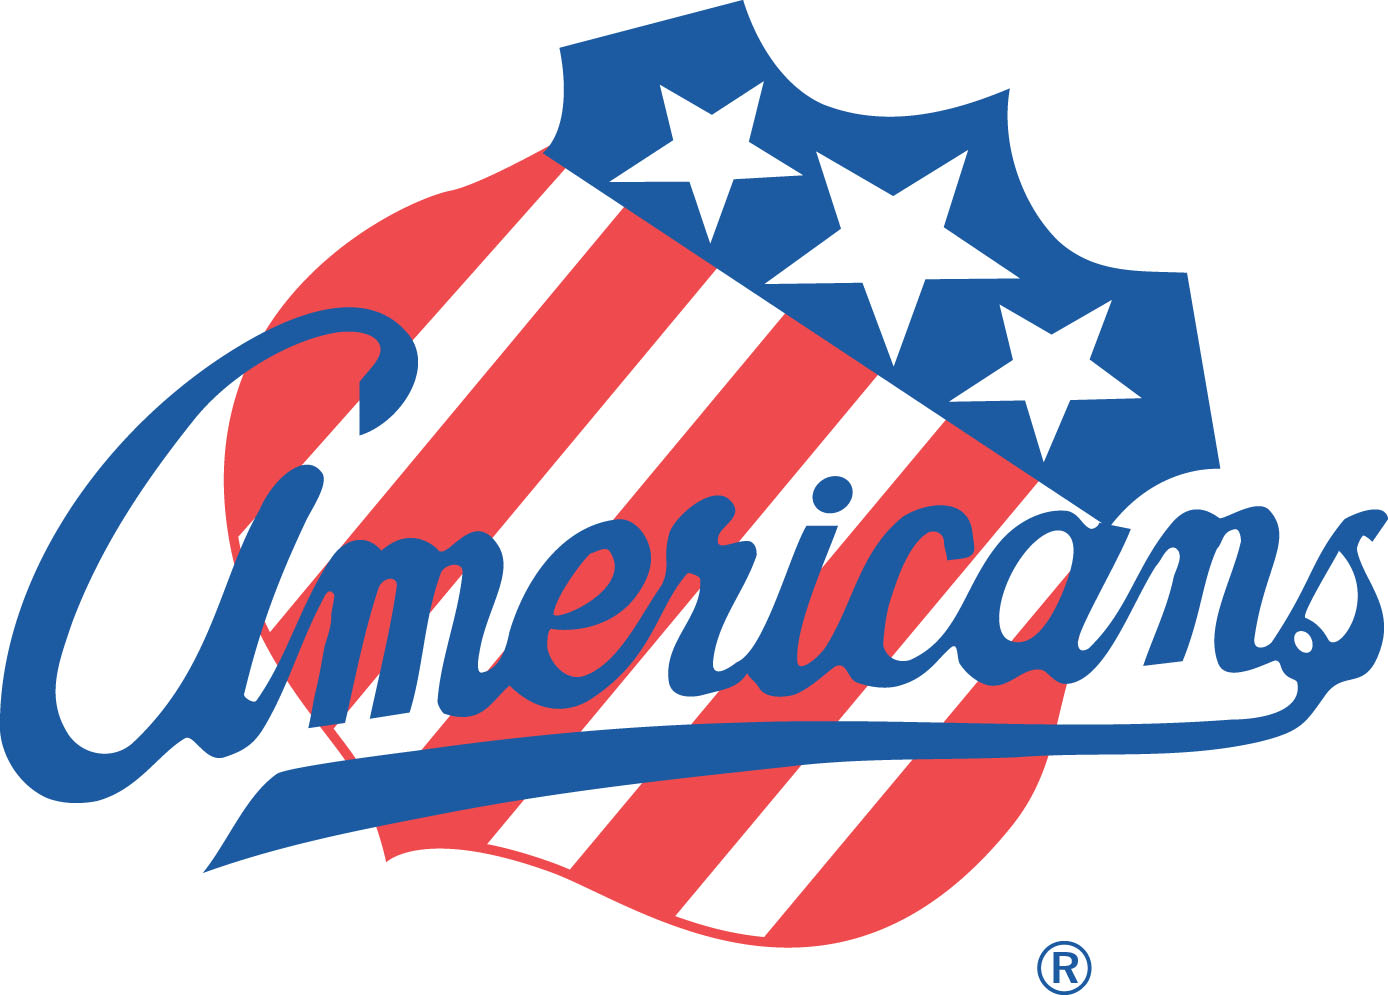 Patrick Kaleta named Rochester Americans AHL Man of the Year